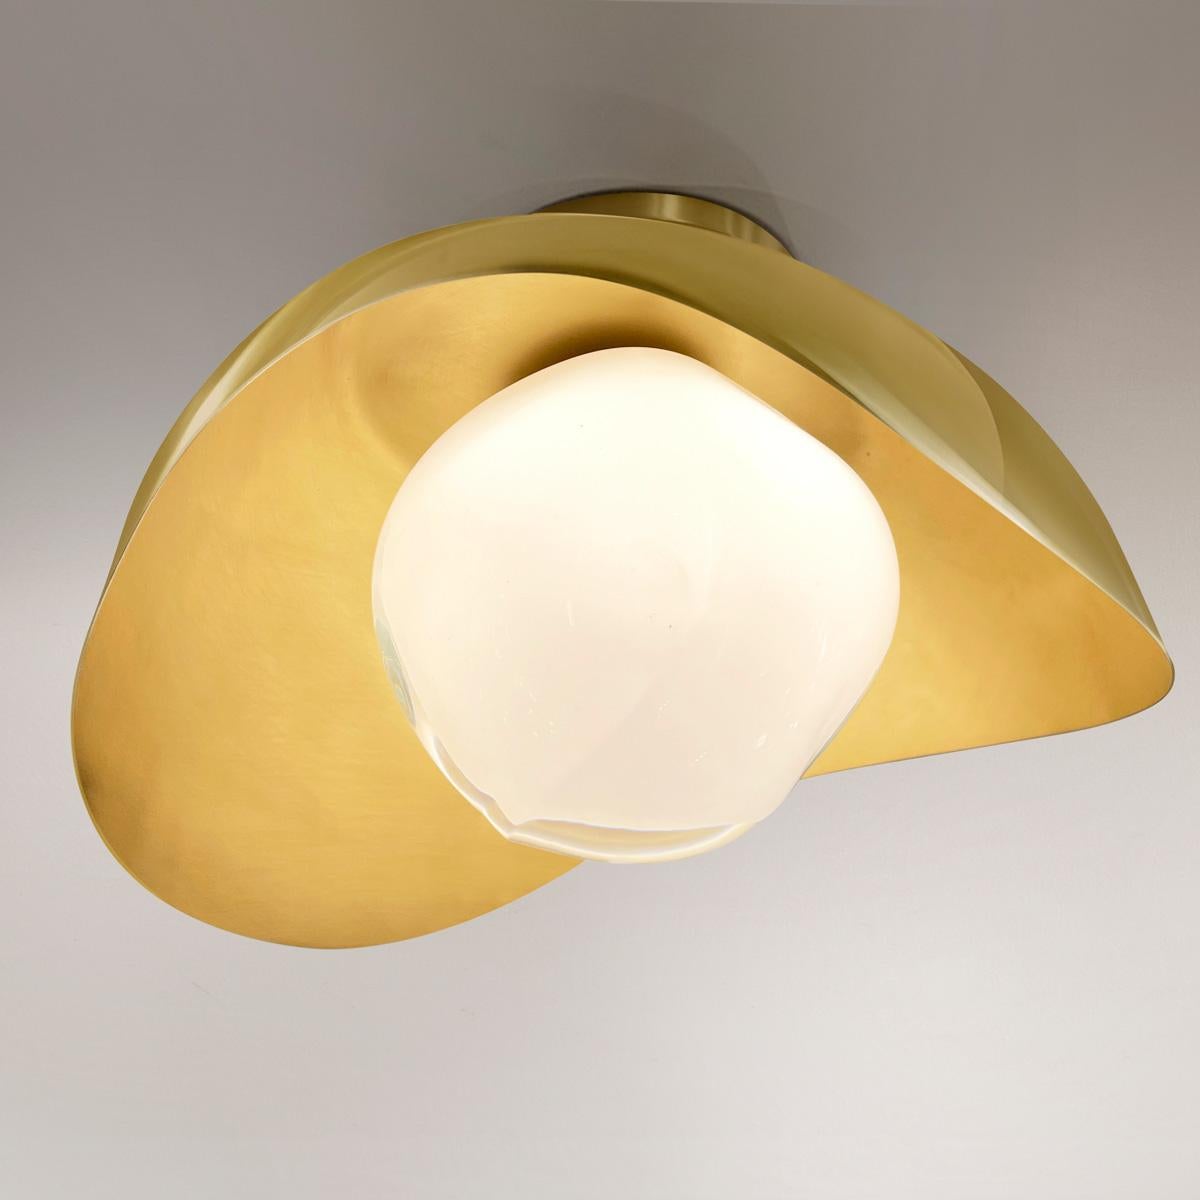 The Perla flushmount features an organic brass shell nestling our Sfera glass handblown in Tuscany. The first images show the fixture with a satin brass interior and polished brass exterior finish-subsequent pictures show it in a selection of